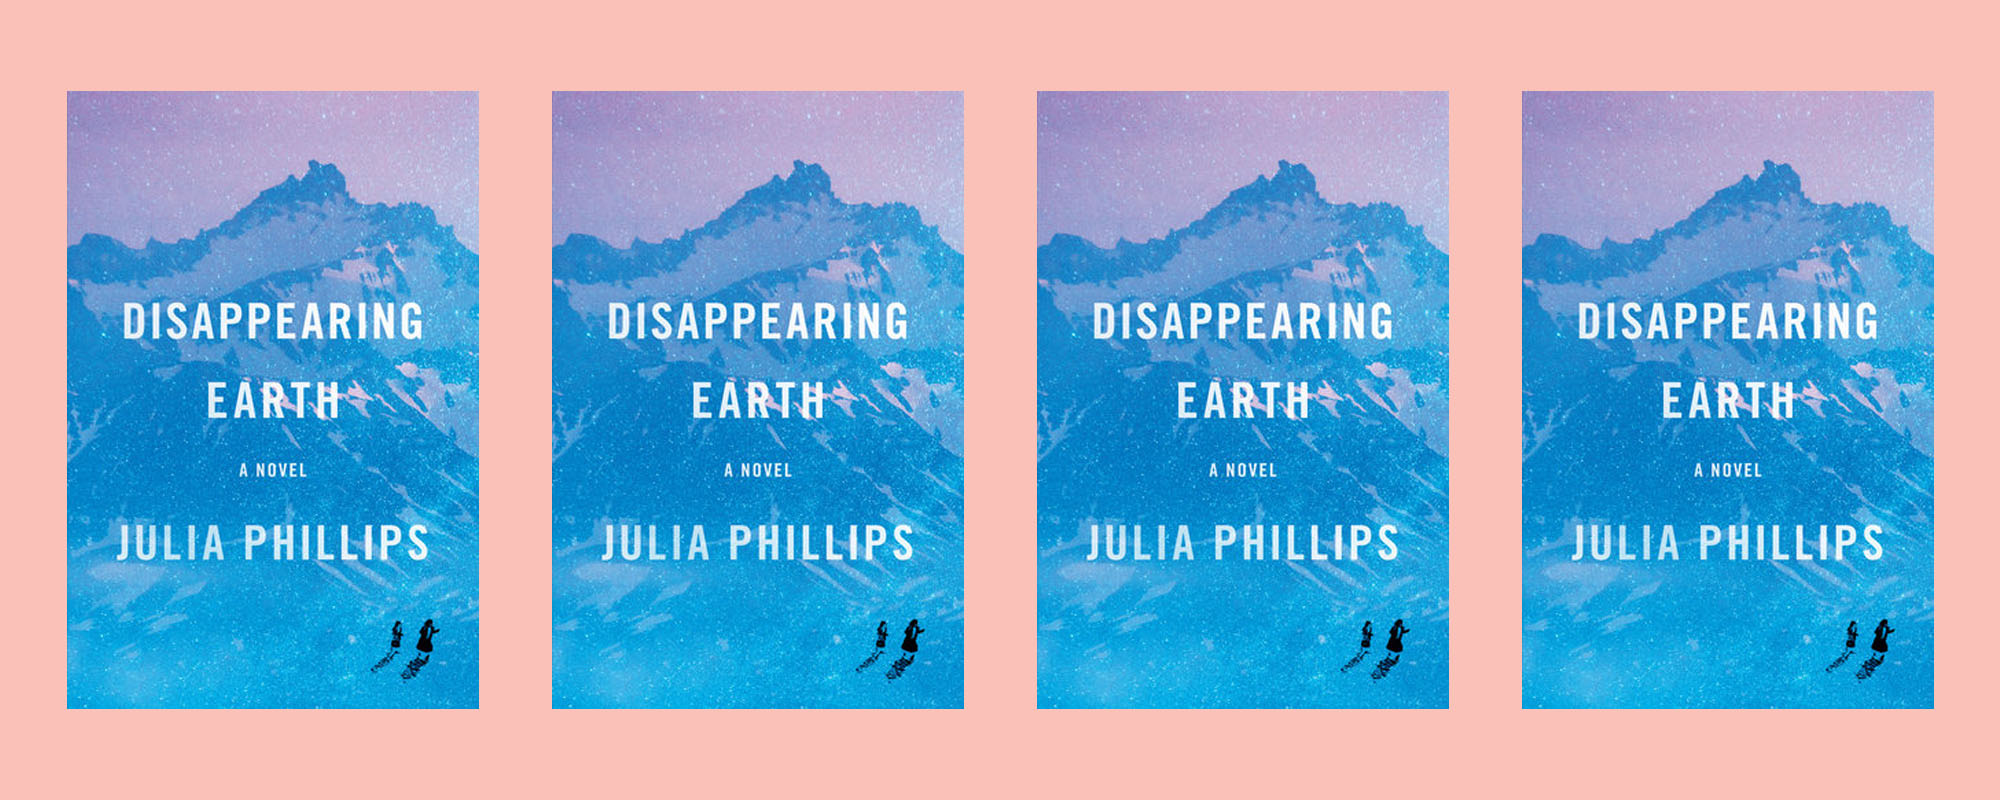 disappearing earth